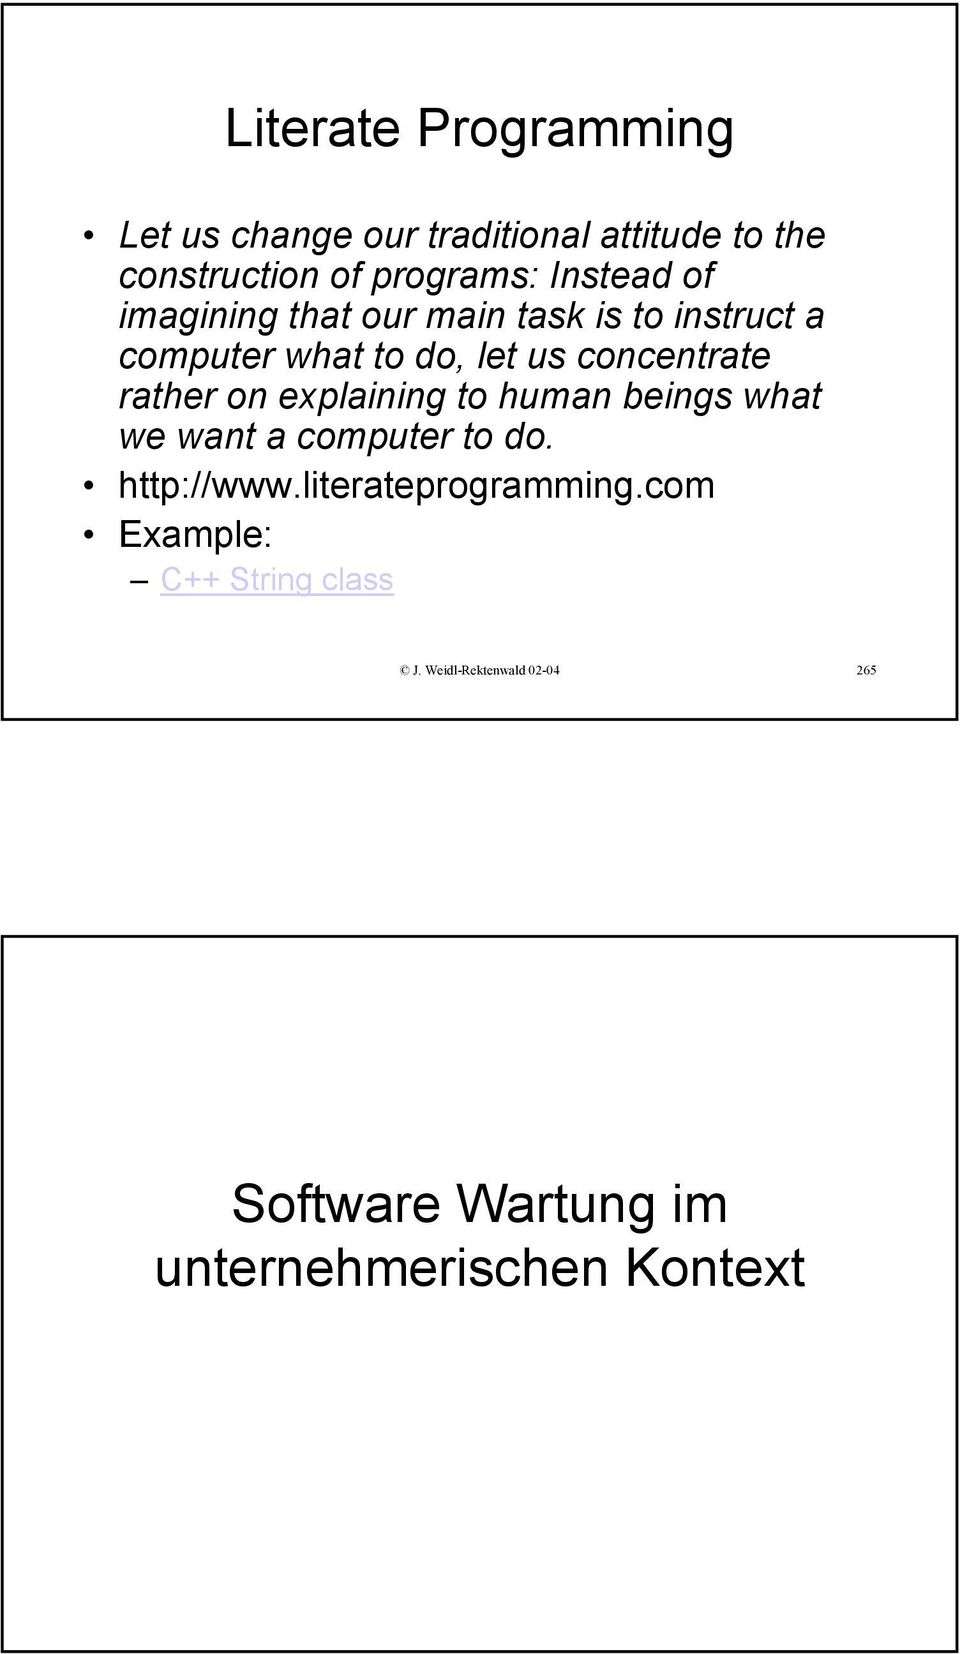 rather on explaining to human beings what we want a computer to do. http://www.literateprogramming.